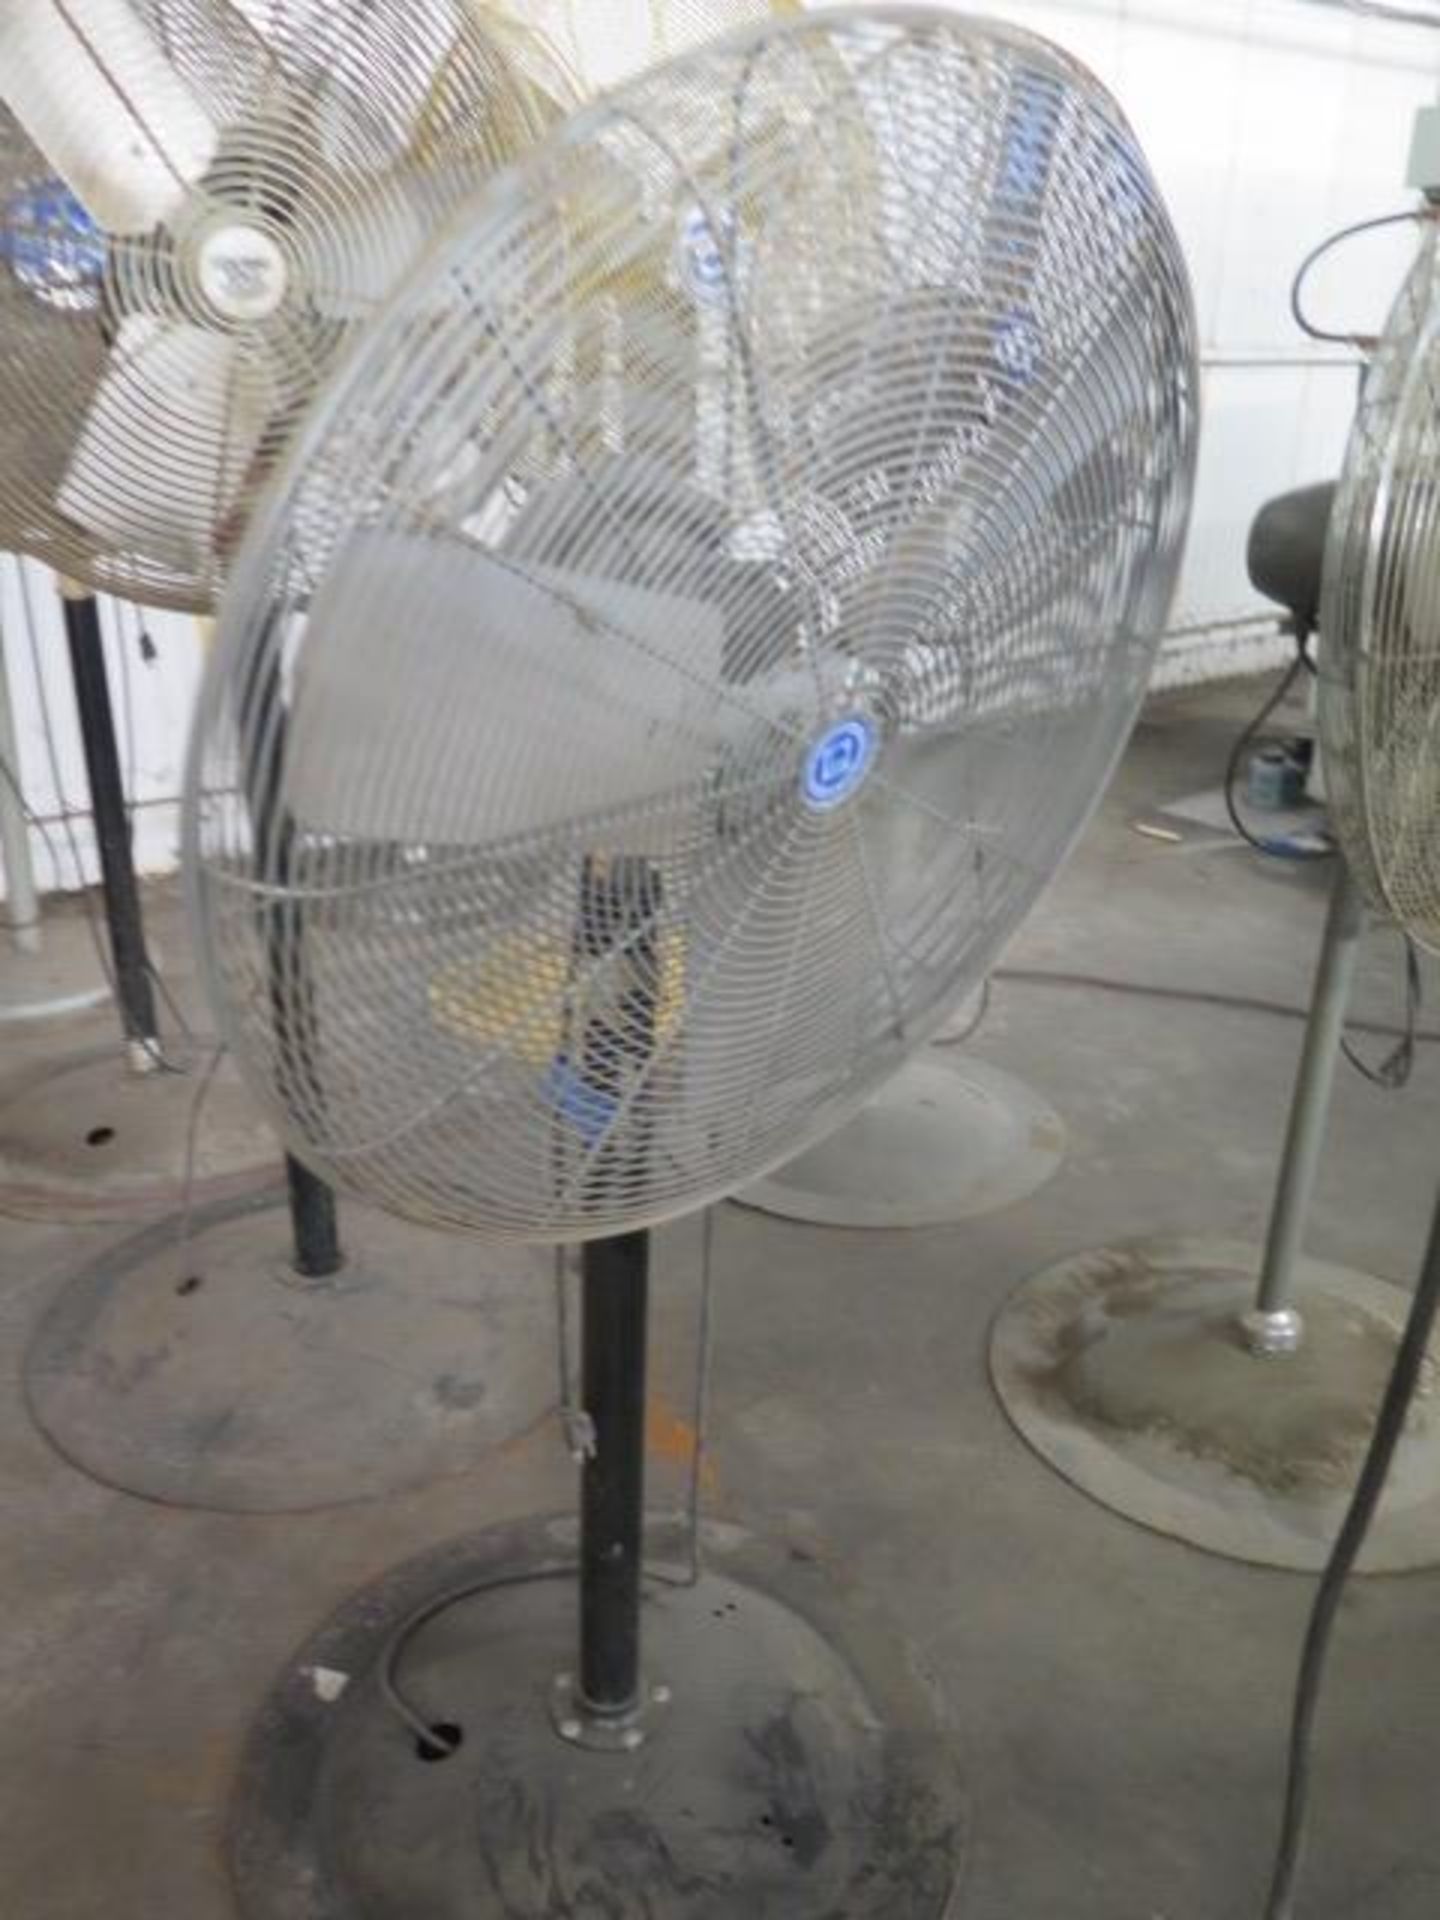 Shop Fans (5) (SOLD AS-IS - NO WARRANTY) - Image 3 of 6